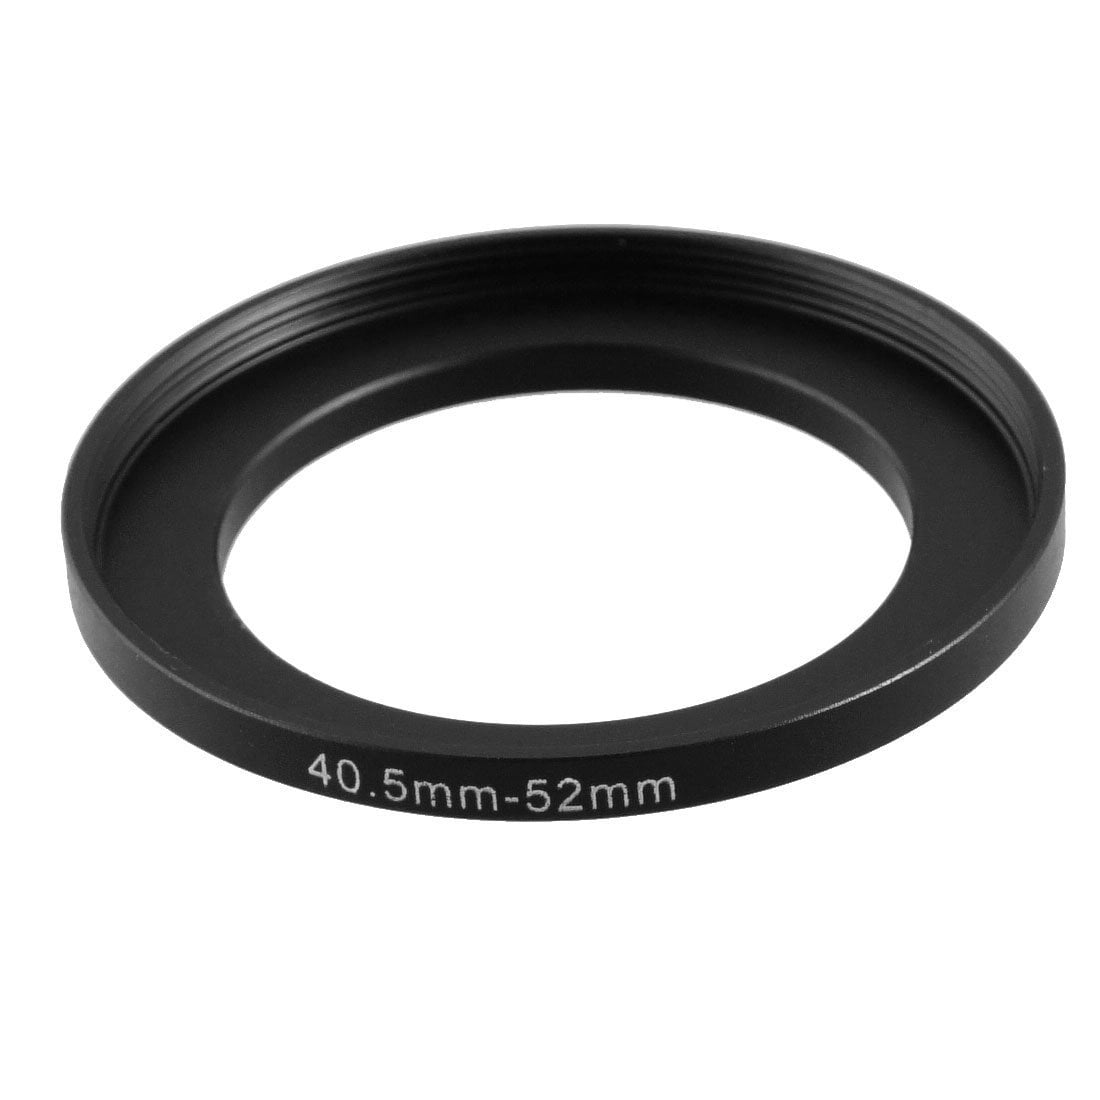 New 40mm-40.5mm Metal Step-Up Ring 40-40.5mm 40-40.5 shipped from US 